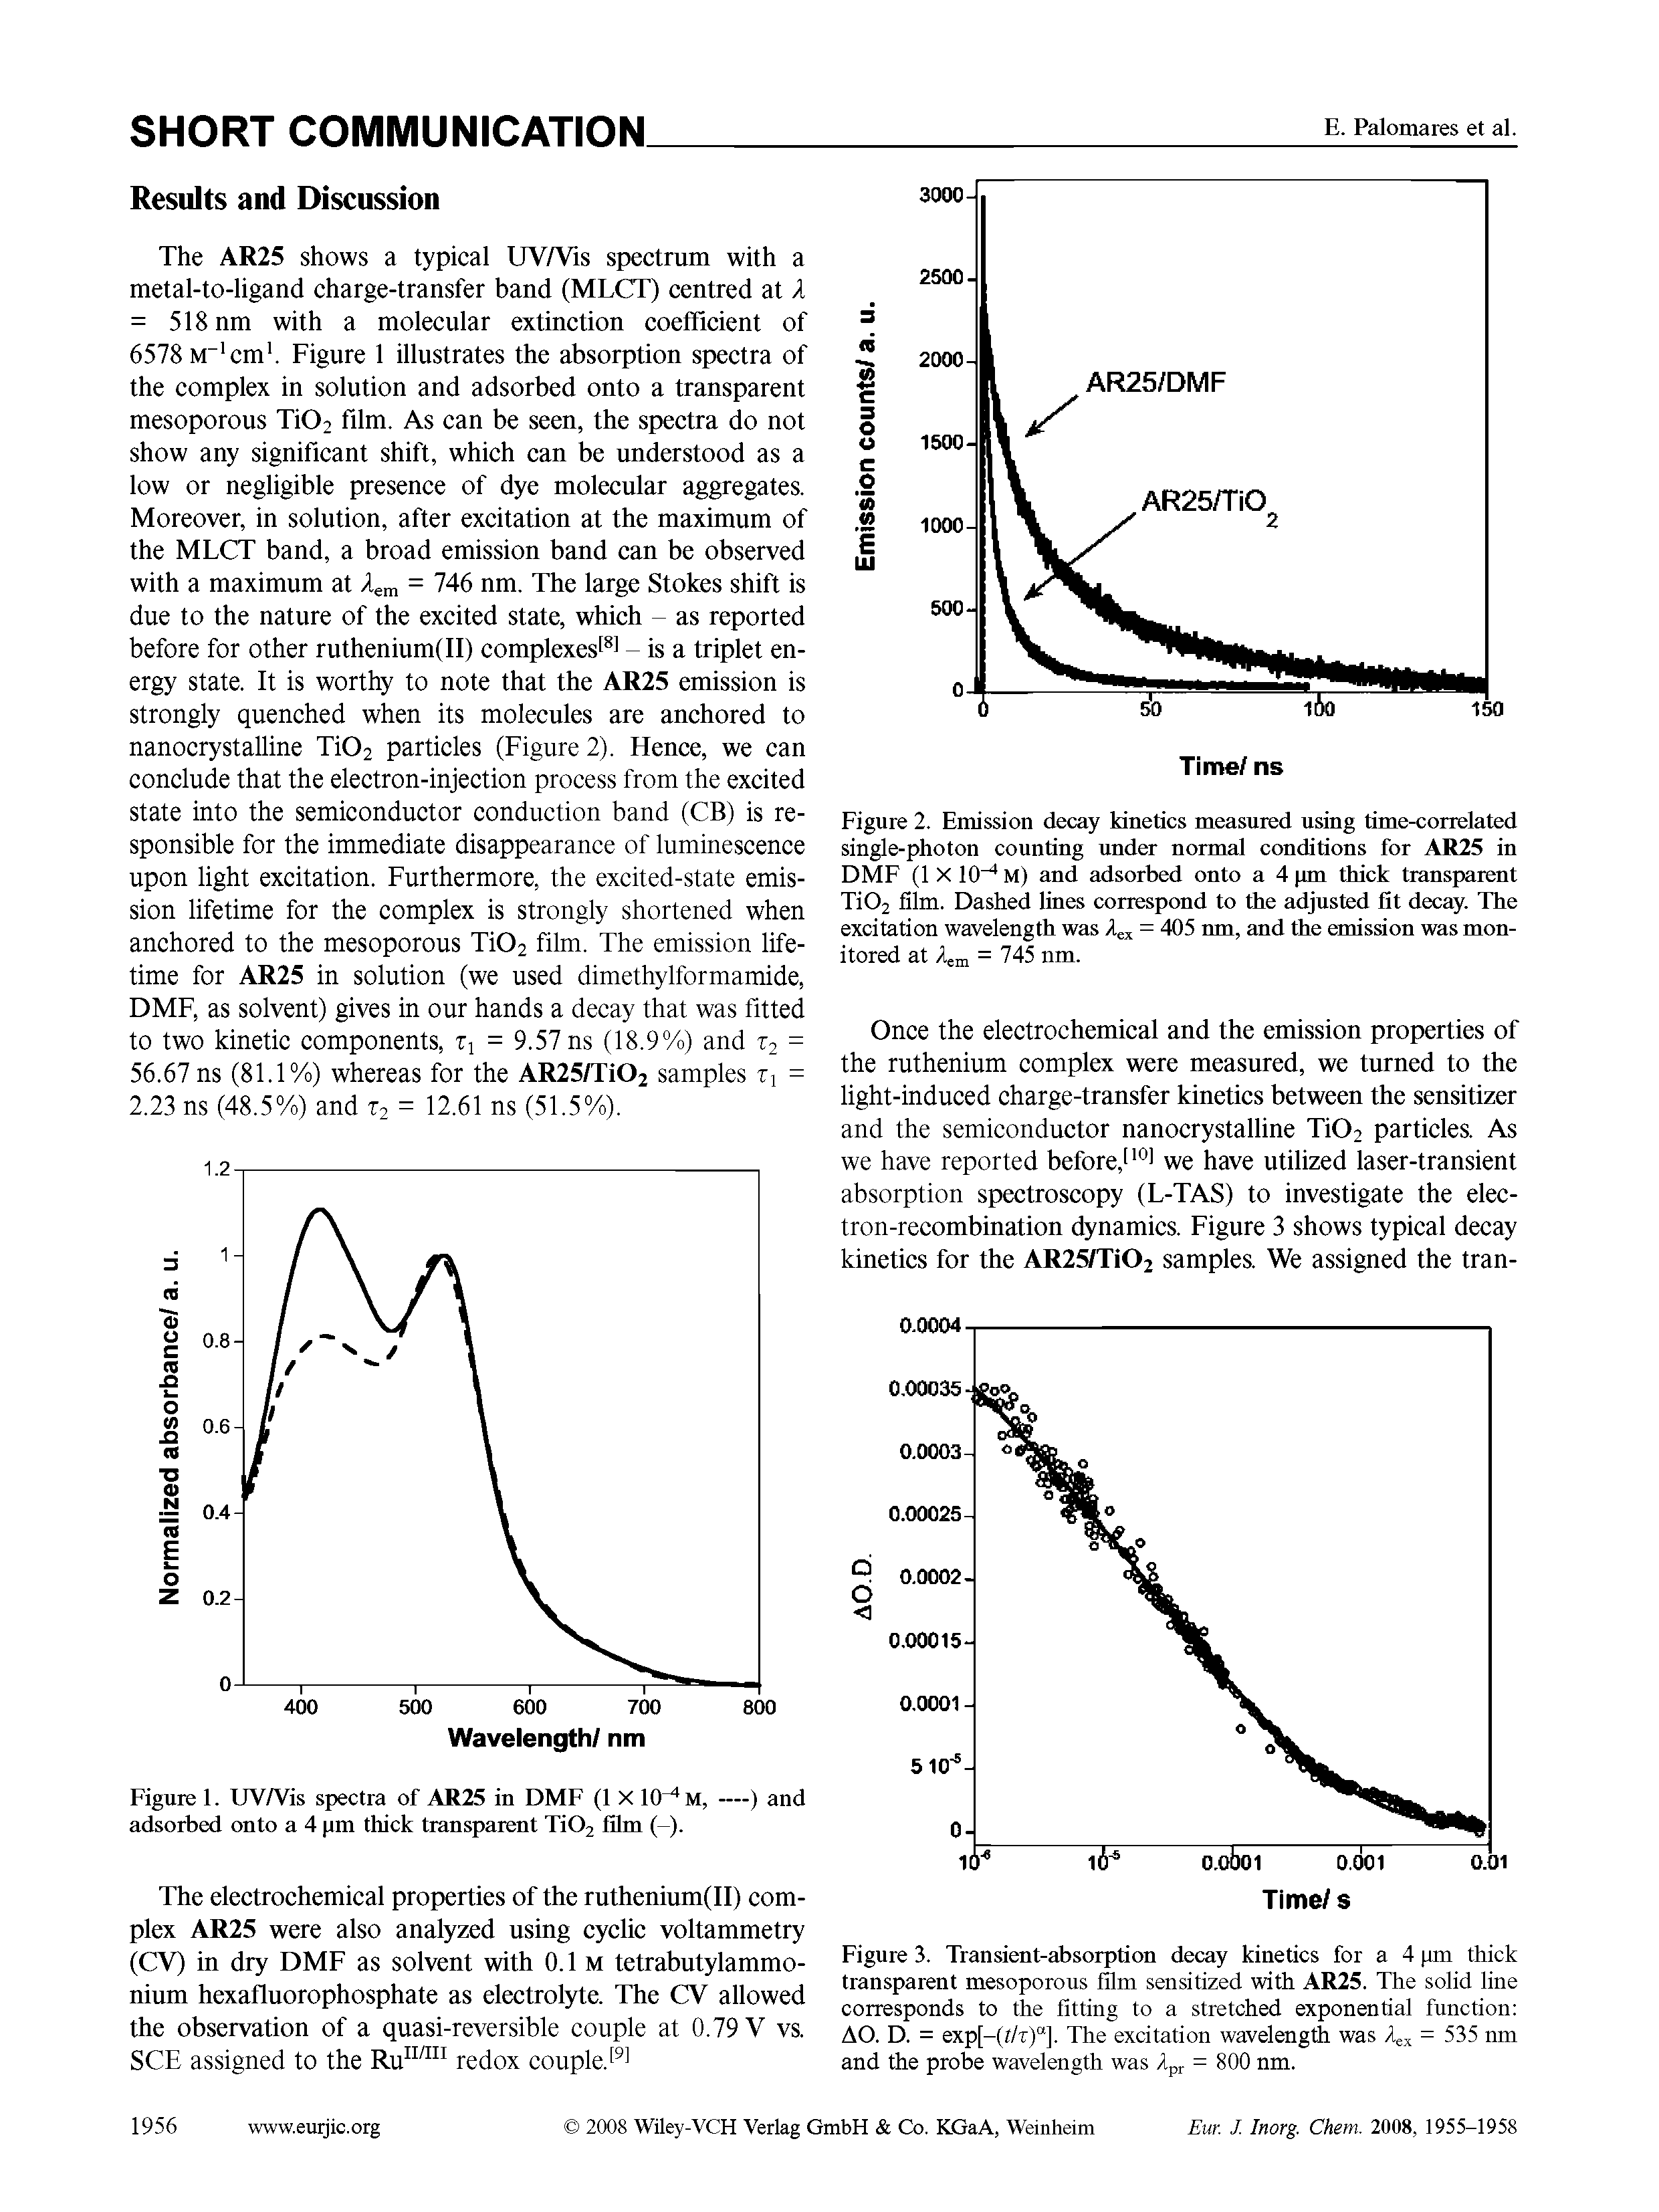 Figure 3. Transient-absorption decay kinetics for a 4 pm thick transparent mesoporous film sensitized with AR25. The solid line corresponds to the fitting to a stretched exponential function AO. D. = exp[-(t/T) ]. The excitation wavelength was = 535 nm and the probe wavelength was Ap, = 800 nm.